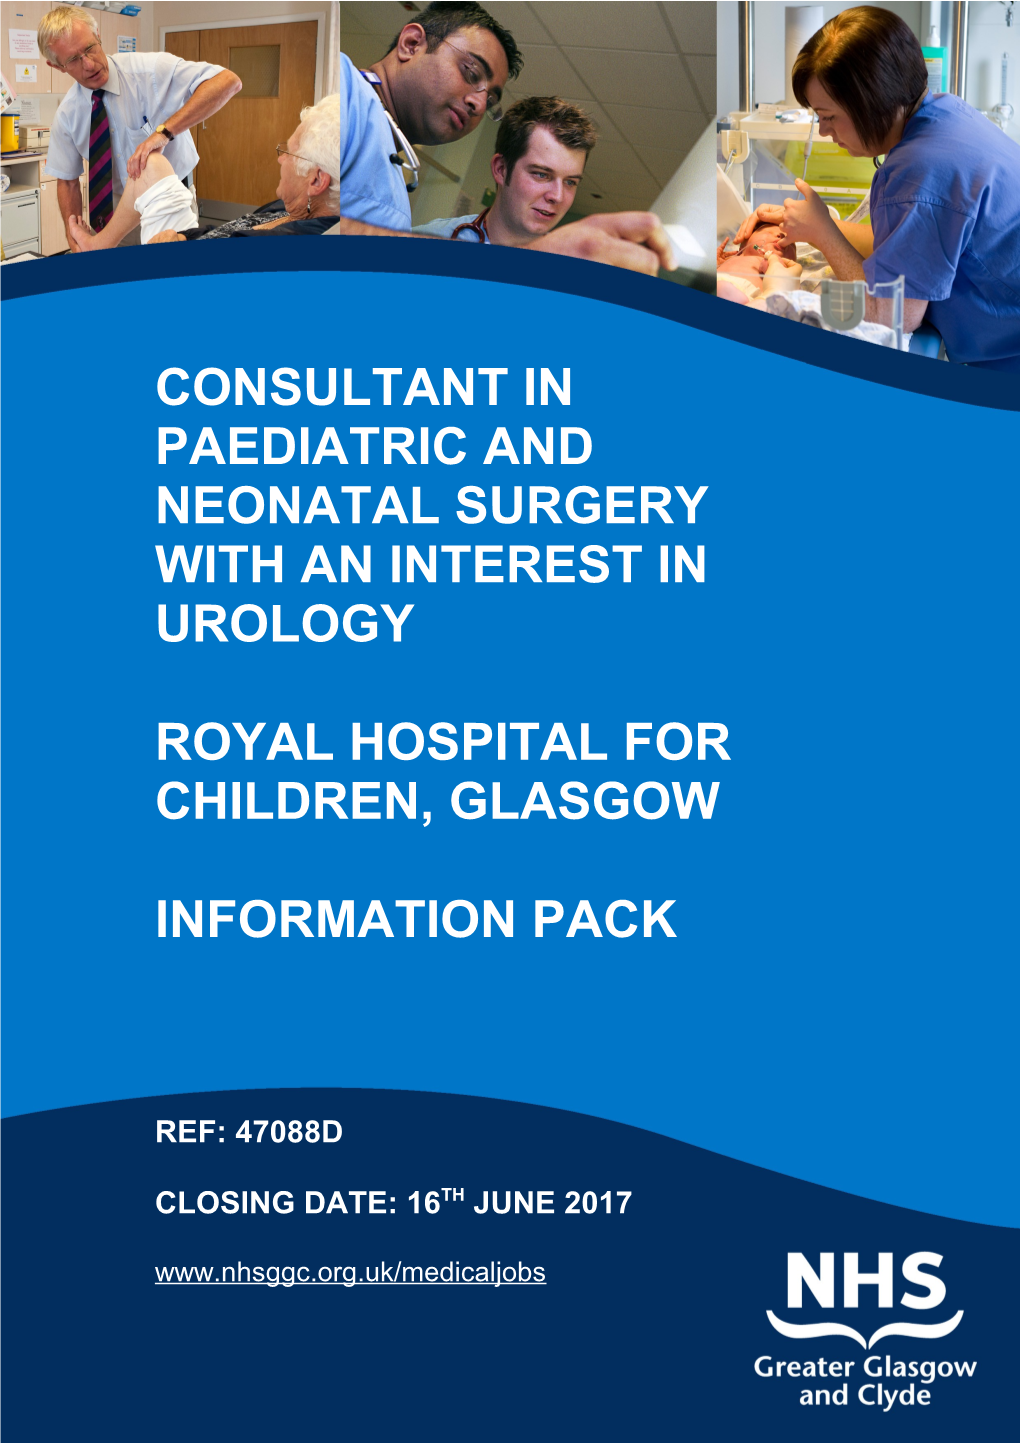 CONSULTANT in PAEDIATRIC and NEONATAL SURGERY